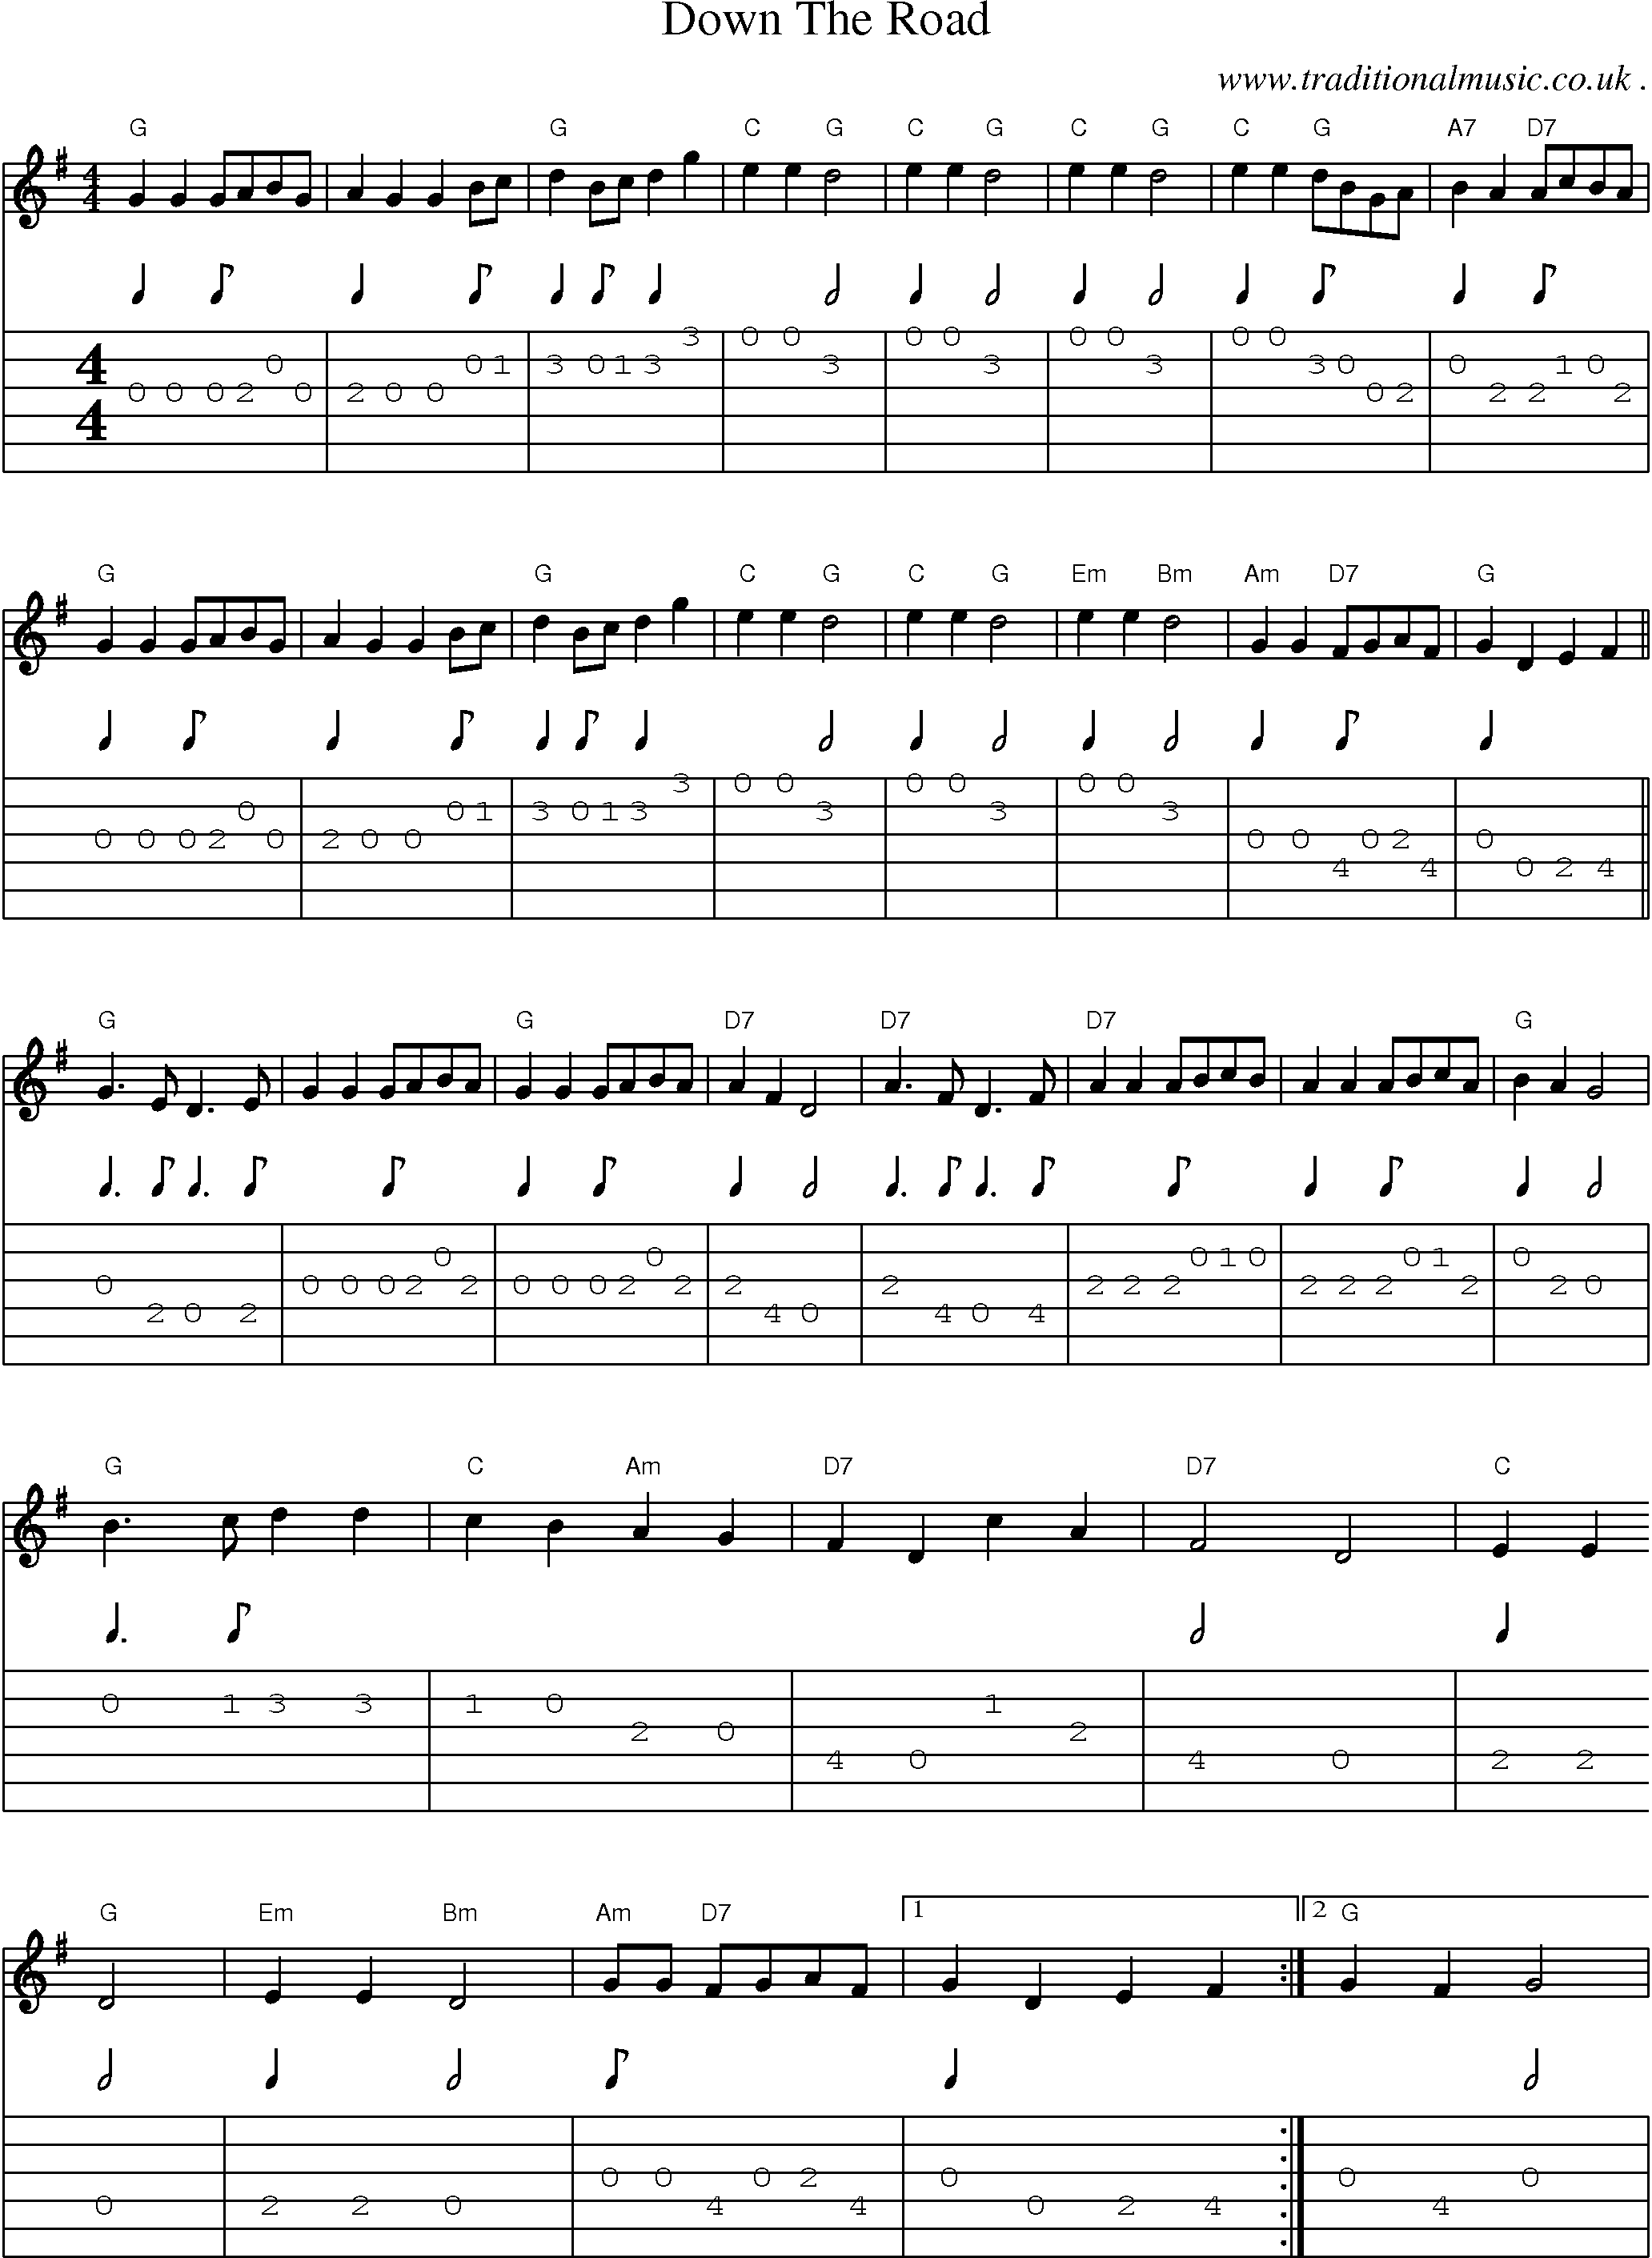 Sheet-music  score, Chords and Guitar Tabs for Down The Road